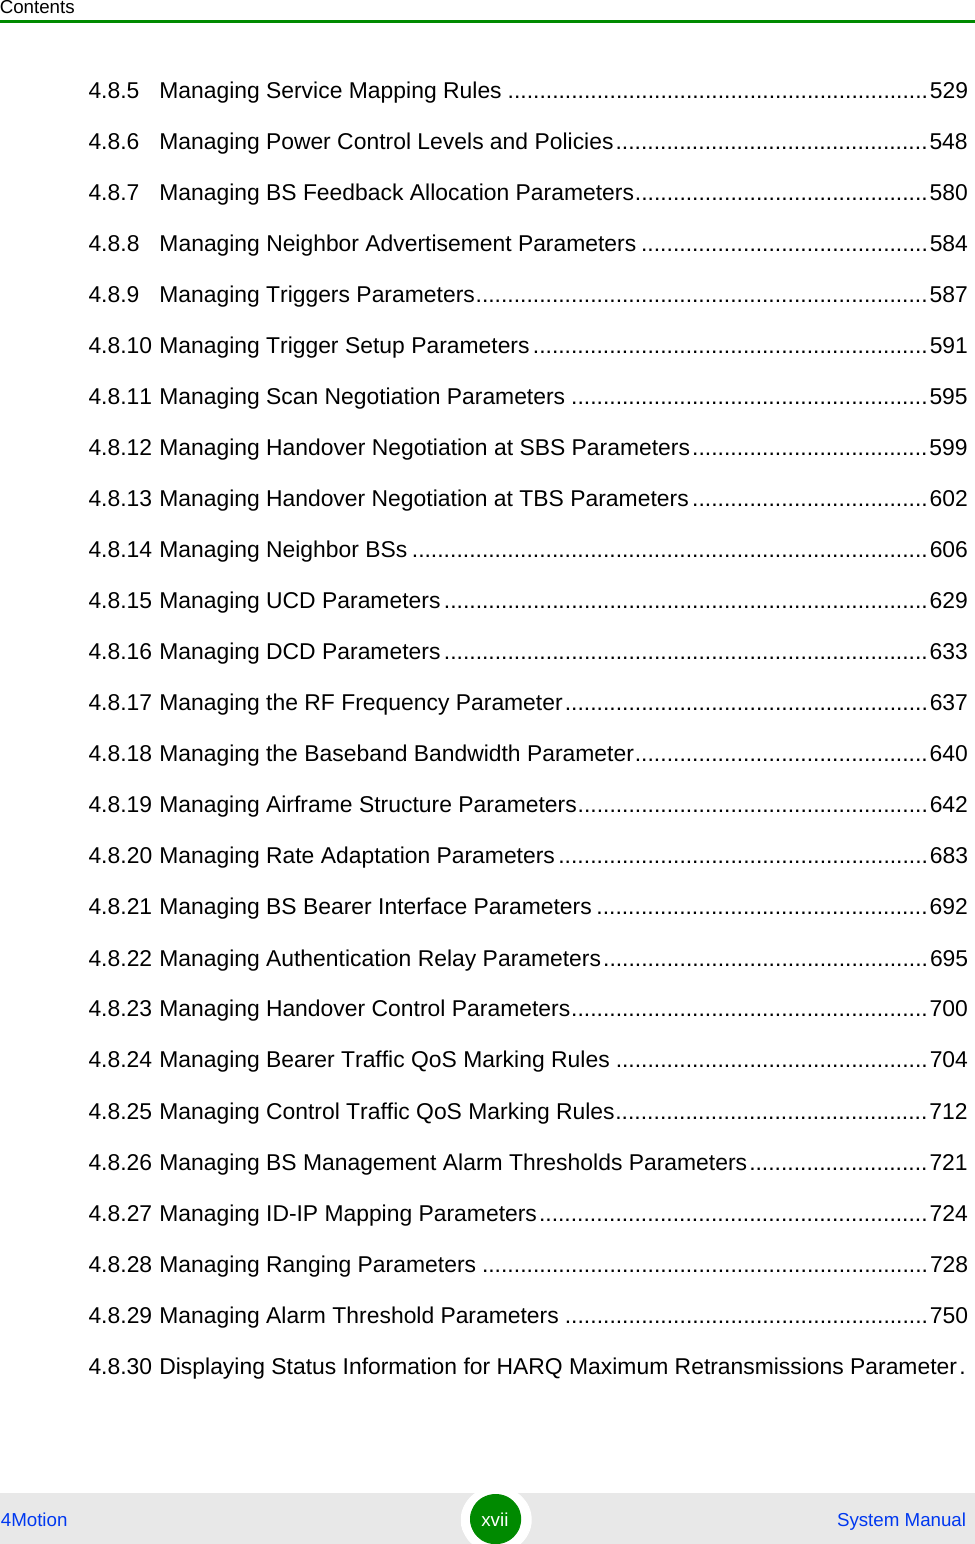 Contents4Motion xvii  System Manual4.8.5 Managing Service Mapping Rules ..................................................................5294.8.6 Managing Power Control Levels and Policies.................................................5484.8.7 Managing BS Feedback Allocation Parameters..............................................5804.8.8 Managing Neighbor Advertisement Parameters .............................................5844.8.9 Managing Triggers Parameters.......................................................................5874.8.10 Managing Trigger Setup Parameters..............................................................5914.8.11 Managing Scan Negotiation Parameters ........................................................5954.8.12 Managing Handover Negotiation at SBS Parameters.....................................5994.8.13 Managing Handover Negotiation at TBS Parameters.....................................6024.8.14 Managing Neighbor BSs .................................................................................6064.8.15 Managing UCD Parameters ............................................................................6294.8.16 Managing DCD Parameters ............................................................................6334.8.17 Managing the RF Frequency Parameter.........................................................6374.8.18 Managing the Baseband Bandwidth Parameter..............................................6404.8.19 Managing Airframe Structure Parameters.......................................................6424.8.20 Managing Rate Adaptation Parameters..........................................................6834.8.21 Managing BS Bearer Interface Parameters ....................................................6924.8.22 Managing Authentication Relay Parameters...................................................6954.8.23 Managing Handover Control Parameters........................................................7004.8.24 Managing Bearer Traffic QoS Marking Rules .................................................7044.8.25 Managing Control Traffic QoS Marking Rules.................................................7124.8.26 Managing BS Management Alarm Thresholds Parameters............................7214.8.27 Managing ID-IP Mapping Parameters.............................................................7244.8.28 Managing Ranging Parameters ......................................................................7284.8.29 Managing Alarm Threshold Parameters .........................................................7504.8.30 Displaying Status Information for HARQ Maximum Retransmissions Parameter.